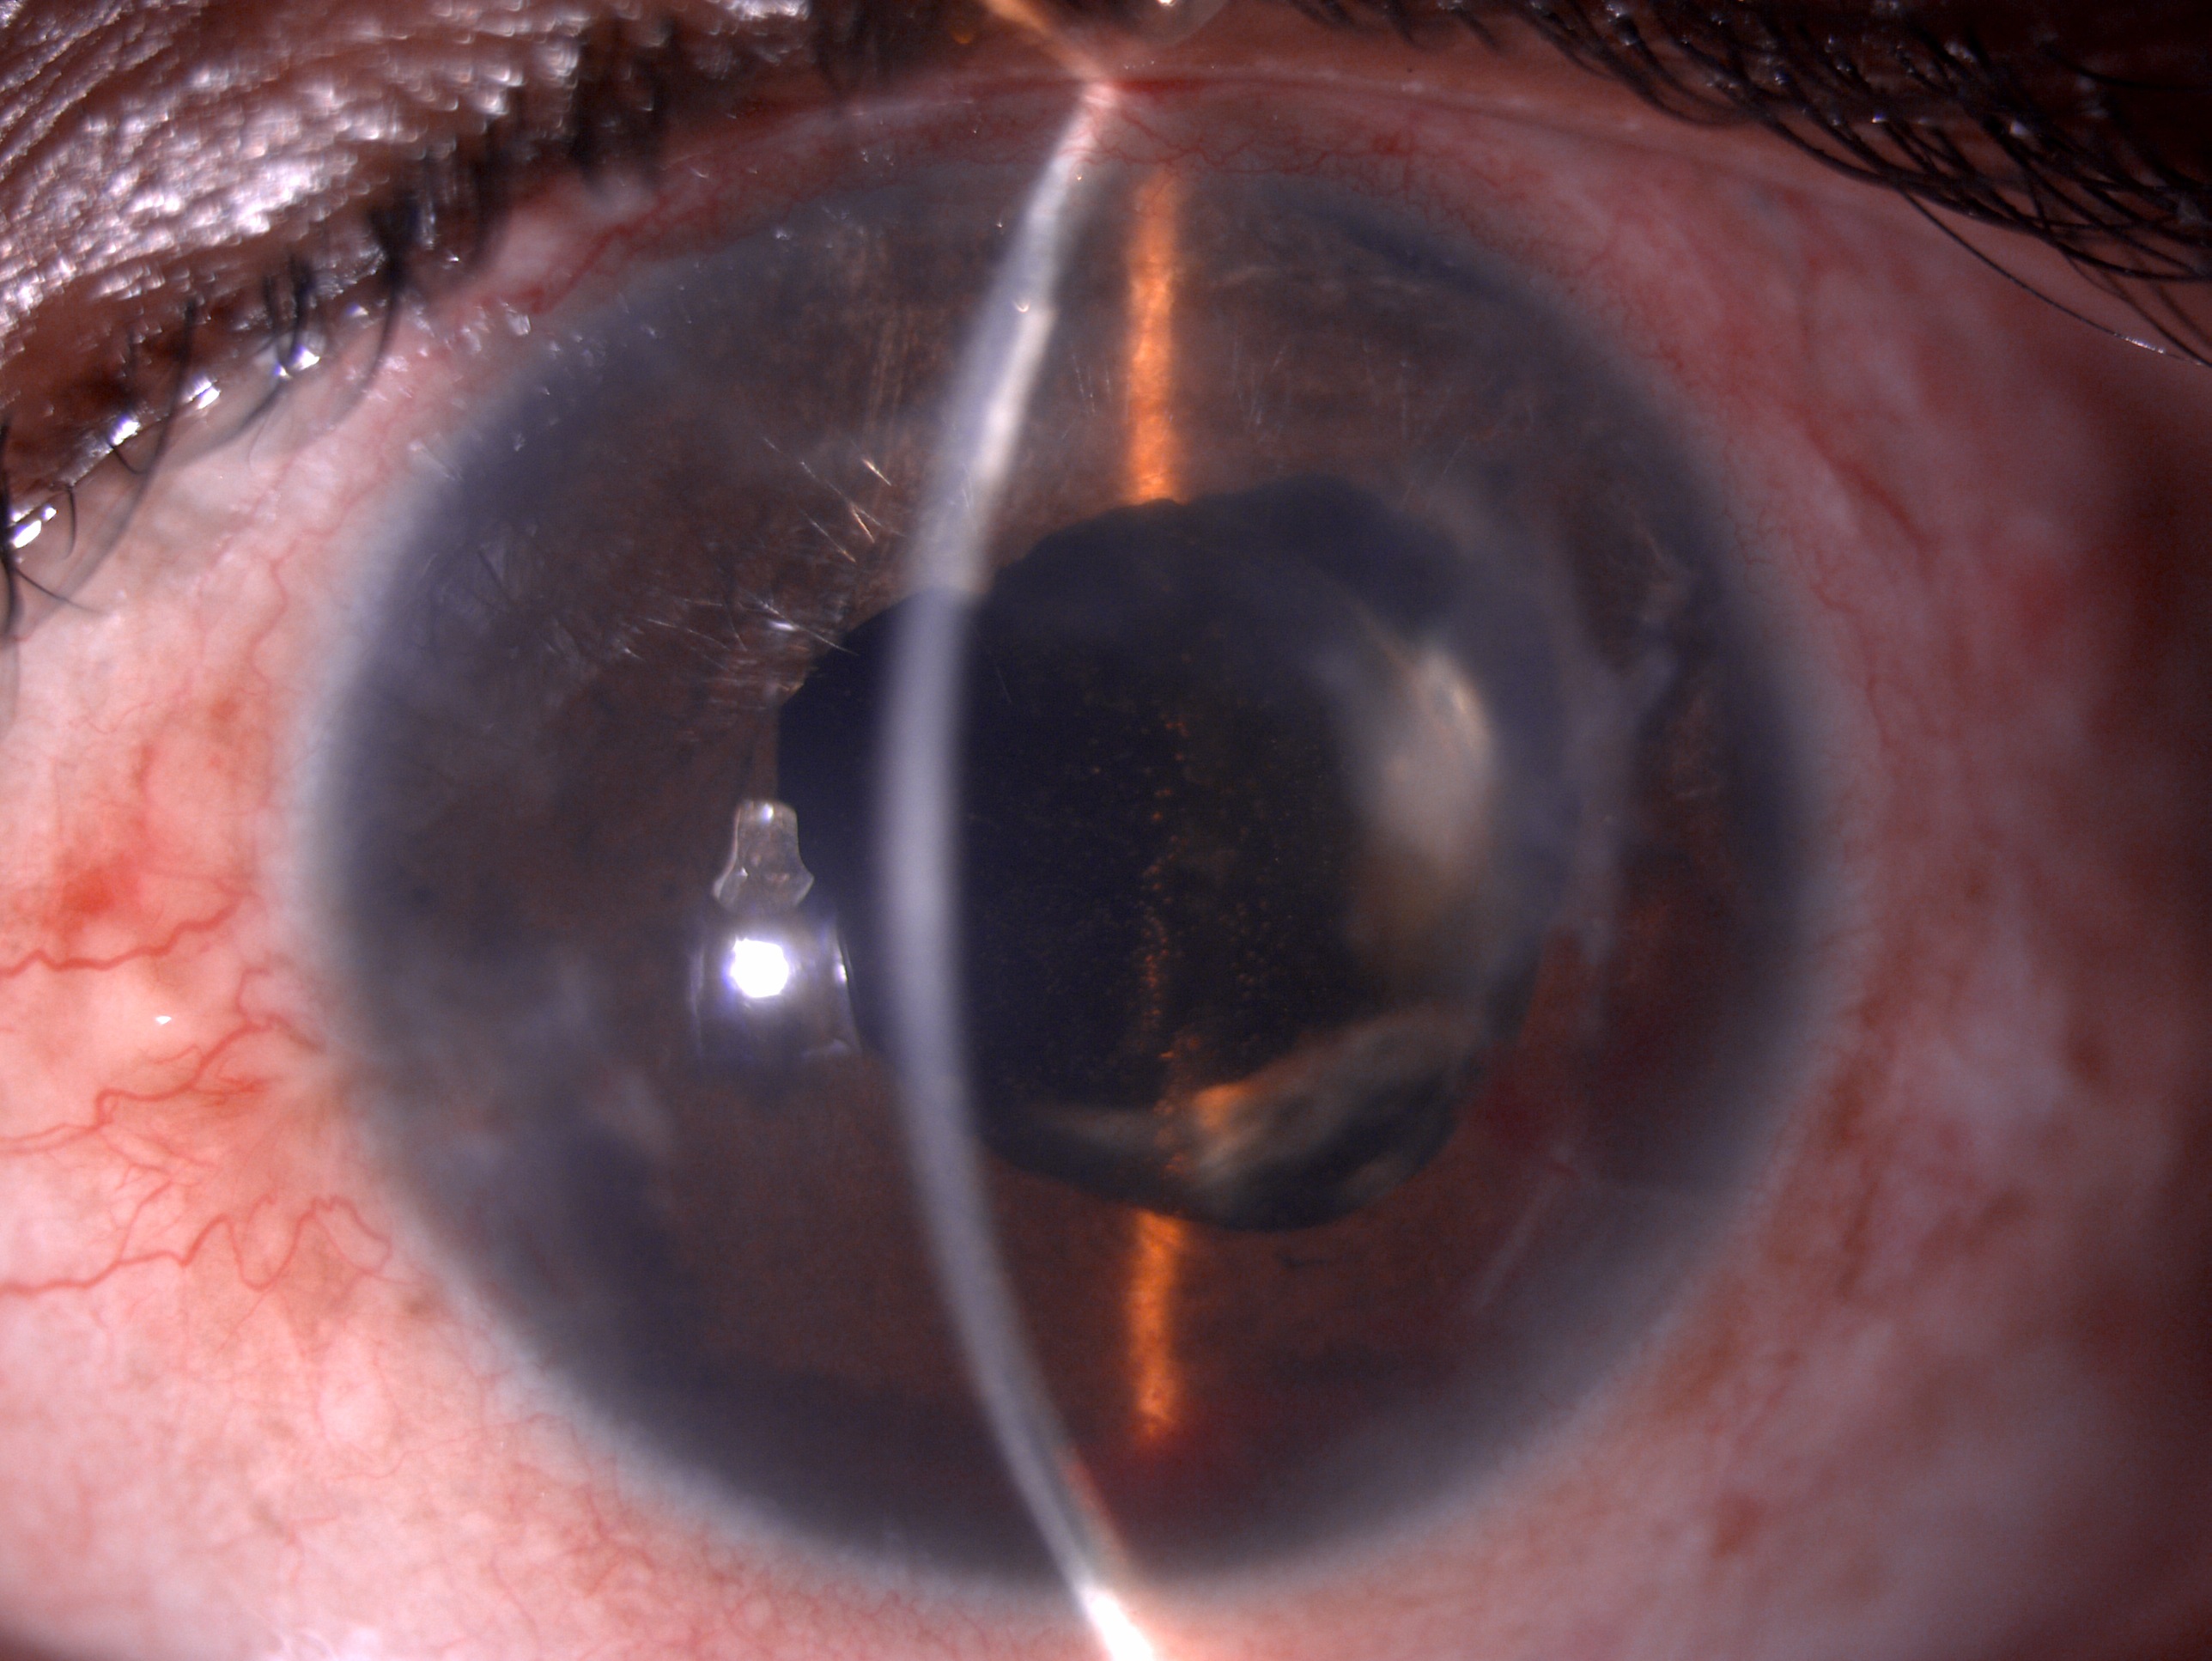 Slit lamp image of the patient post nasal iridodialysis repair by McCannel technique